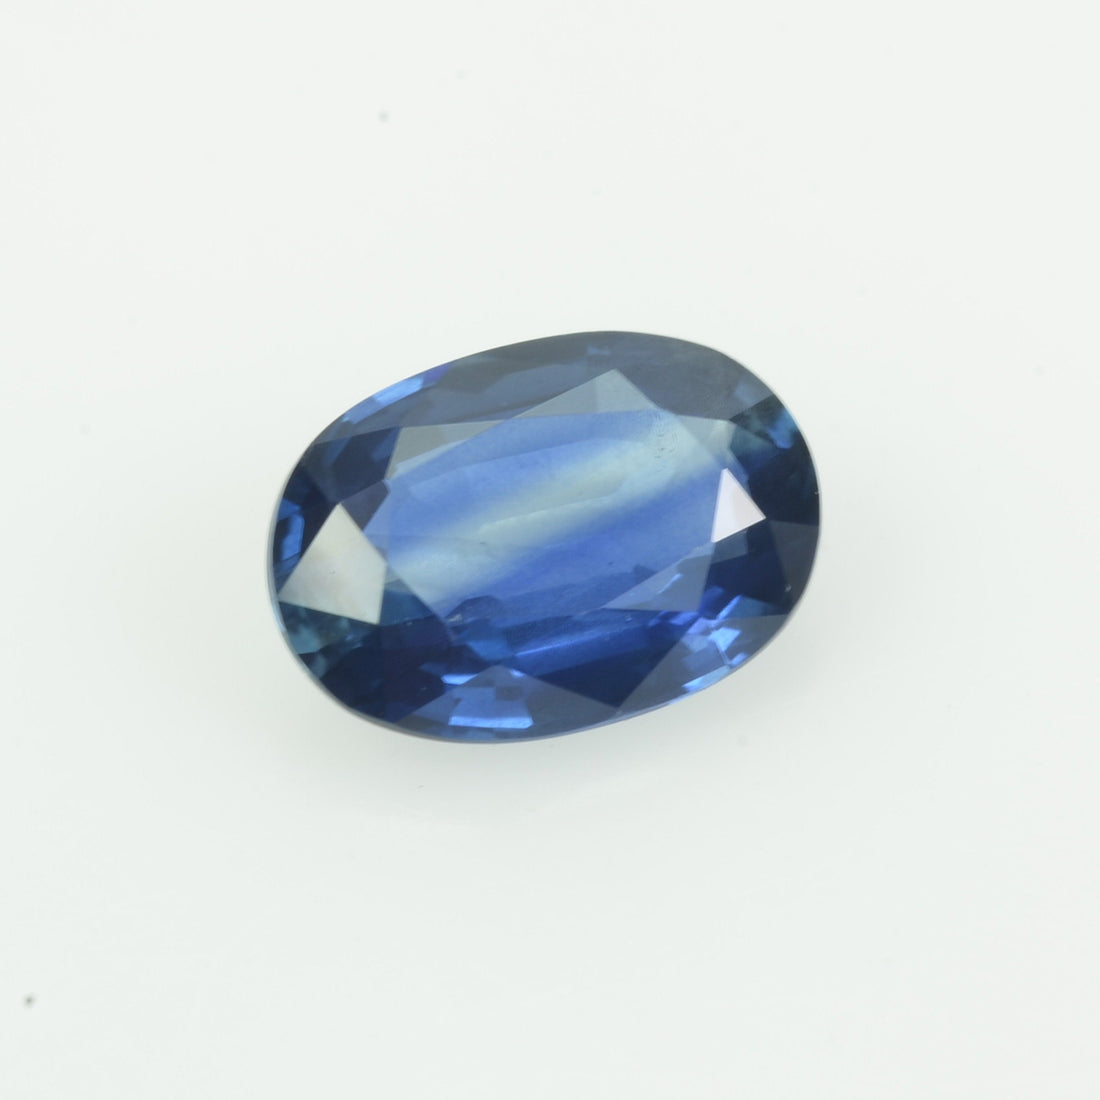 0.82 cts Natural Blue Sapphire Loose Gemstone Oval Cut